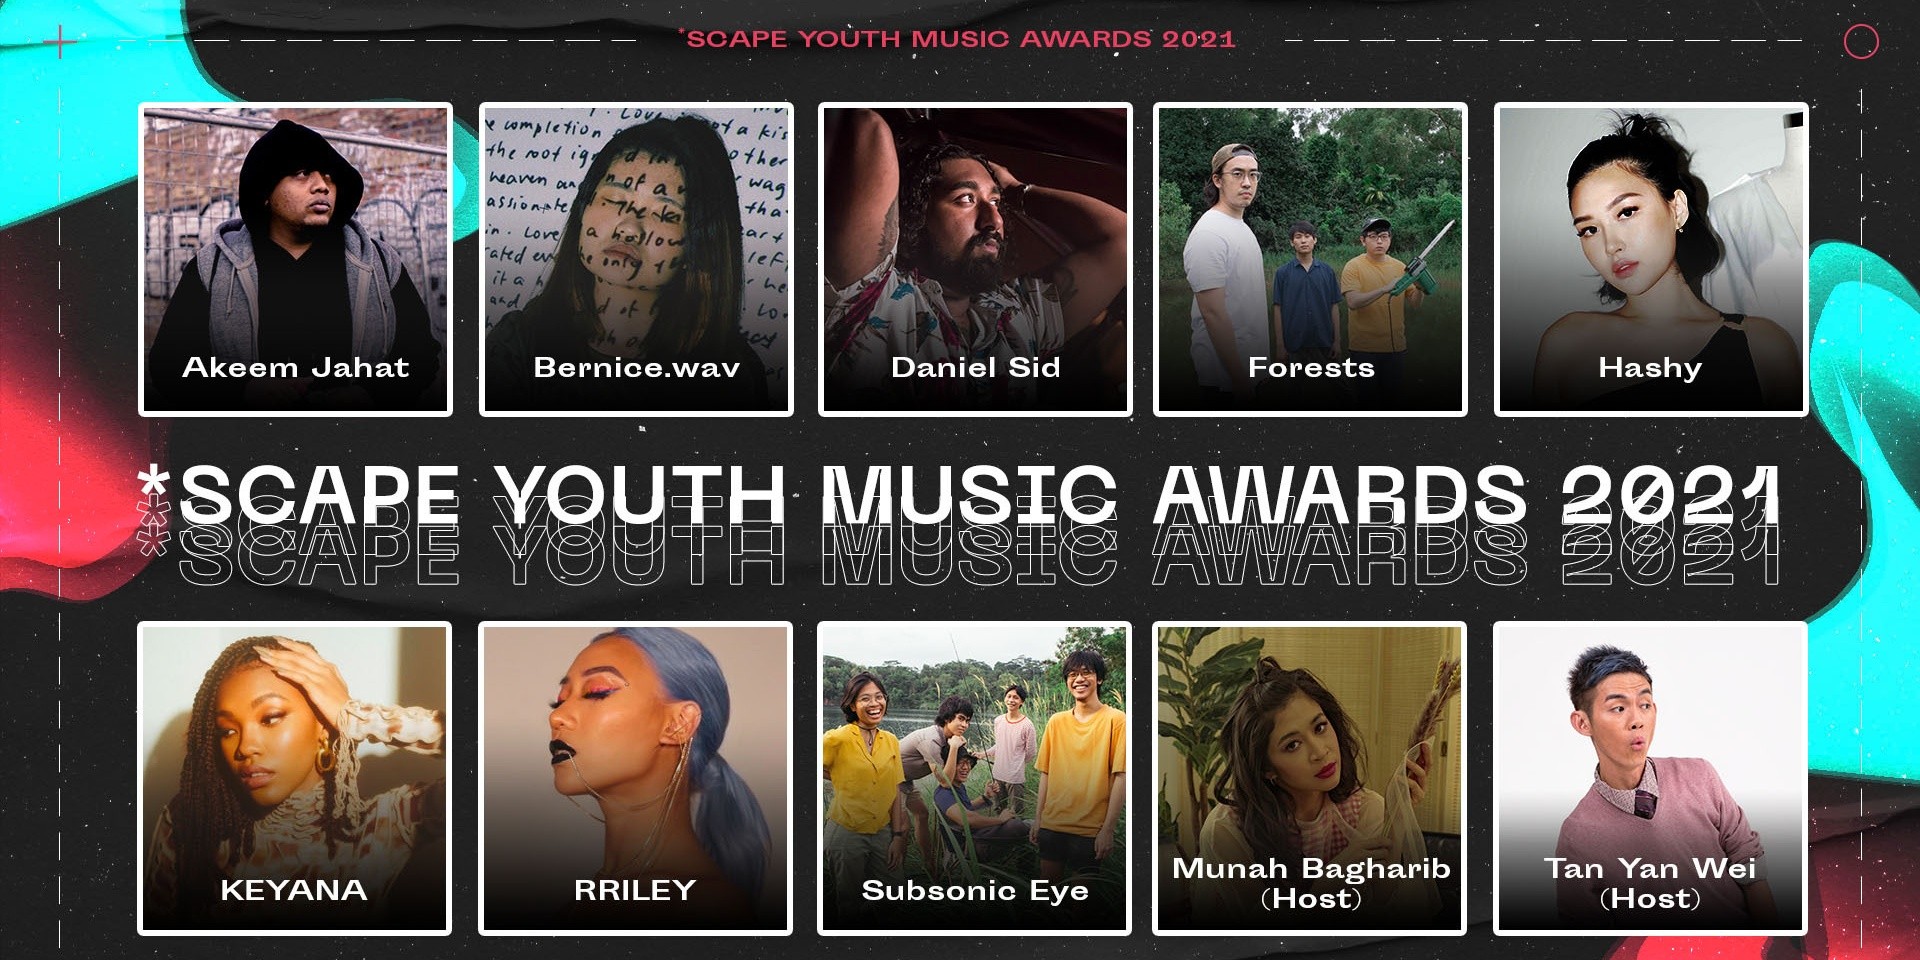 The countdown to *SCAPE Youth Music Awards 2021 has begun - here's everything you need to know about it